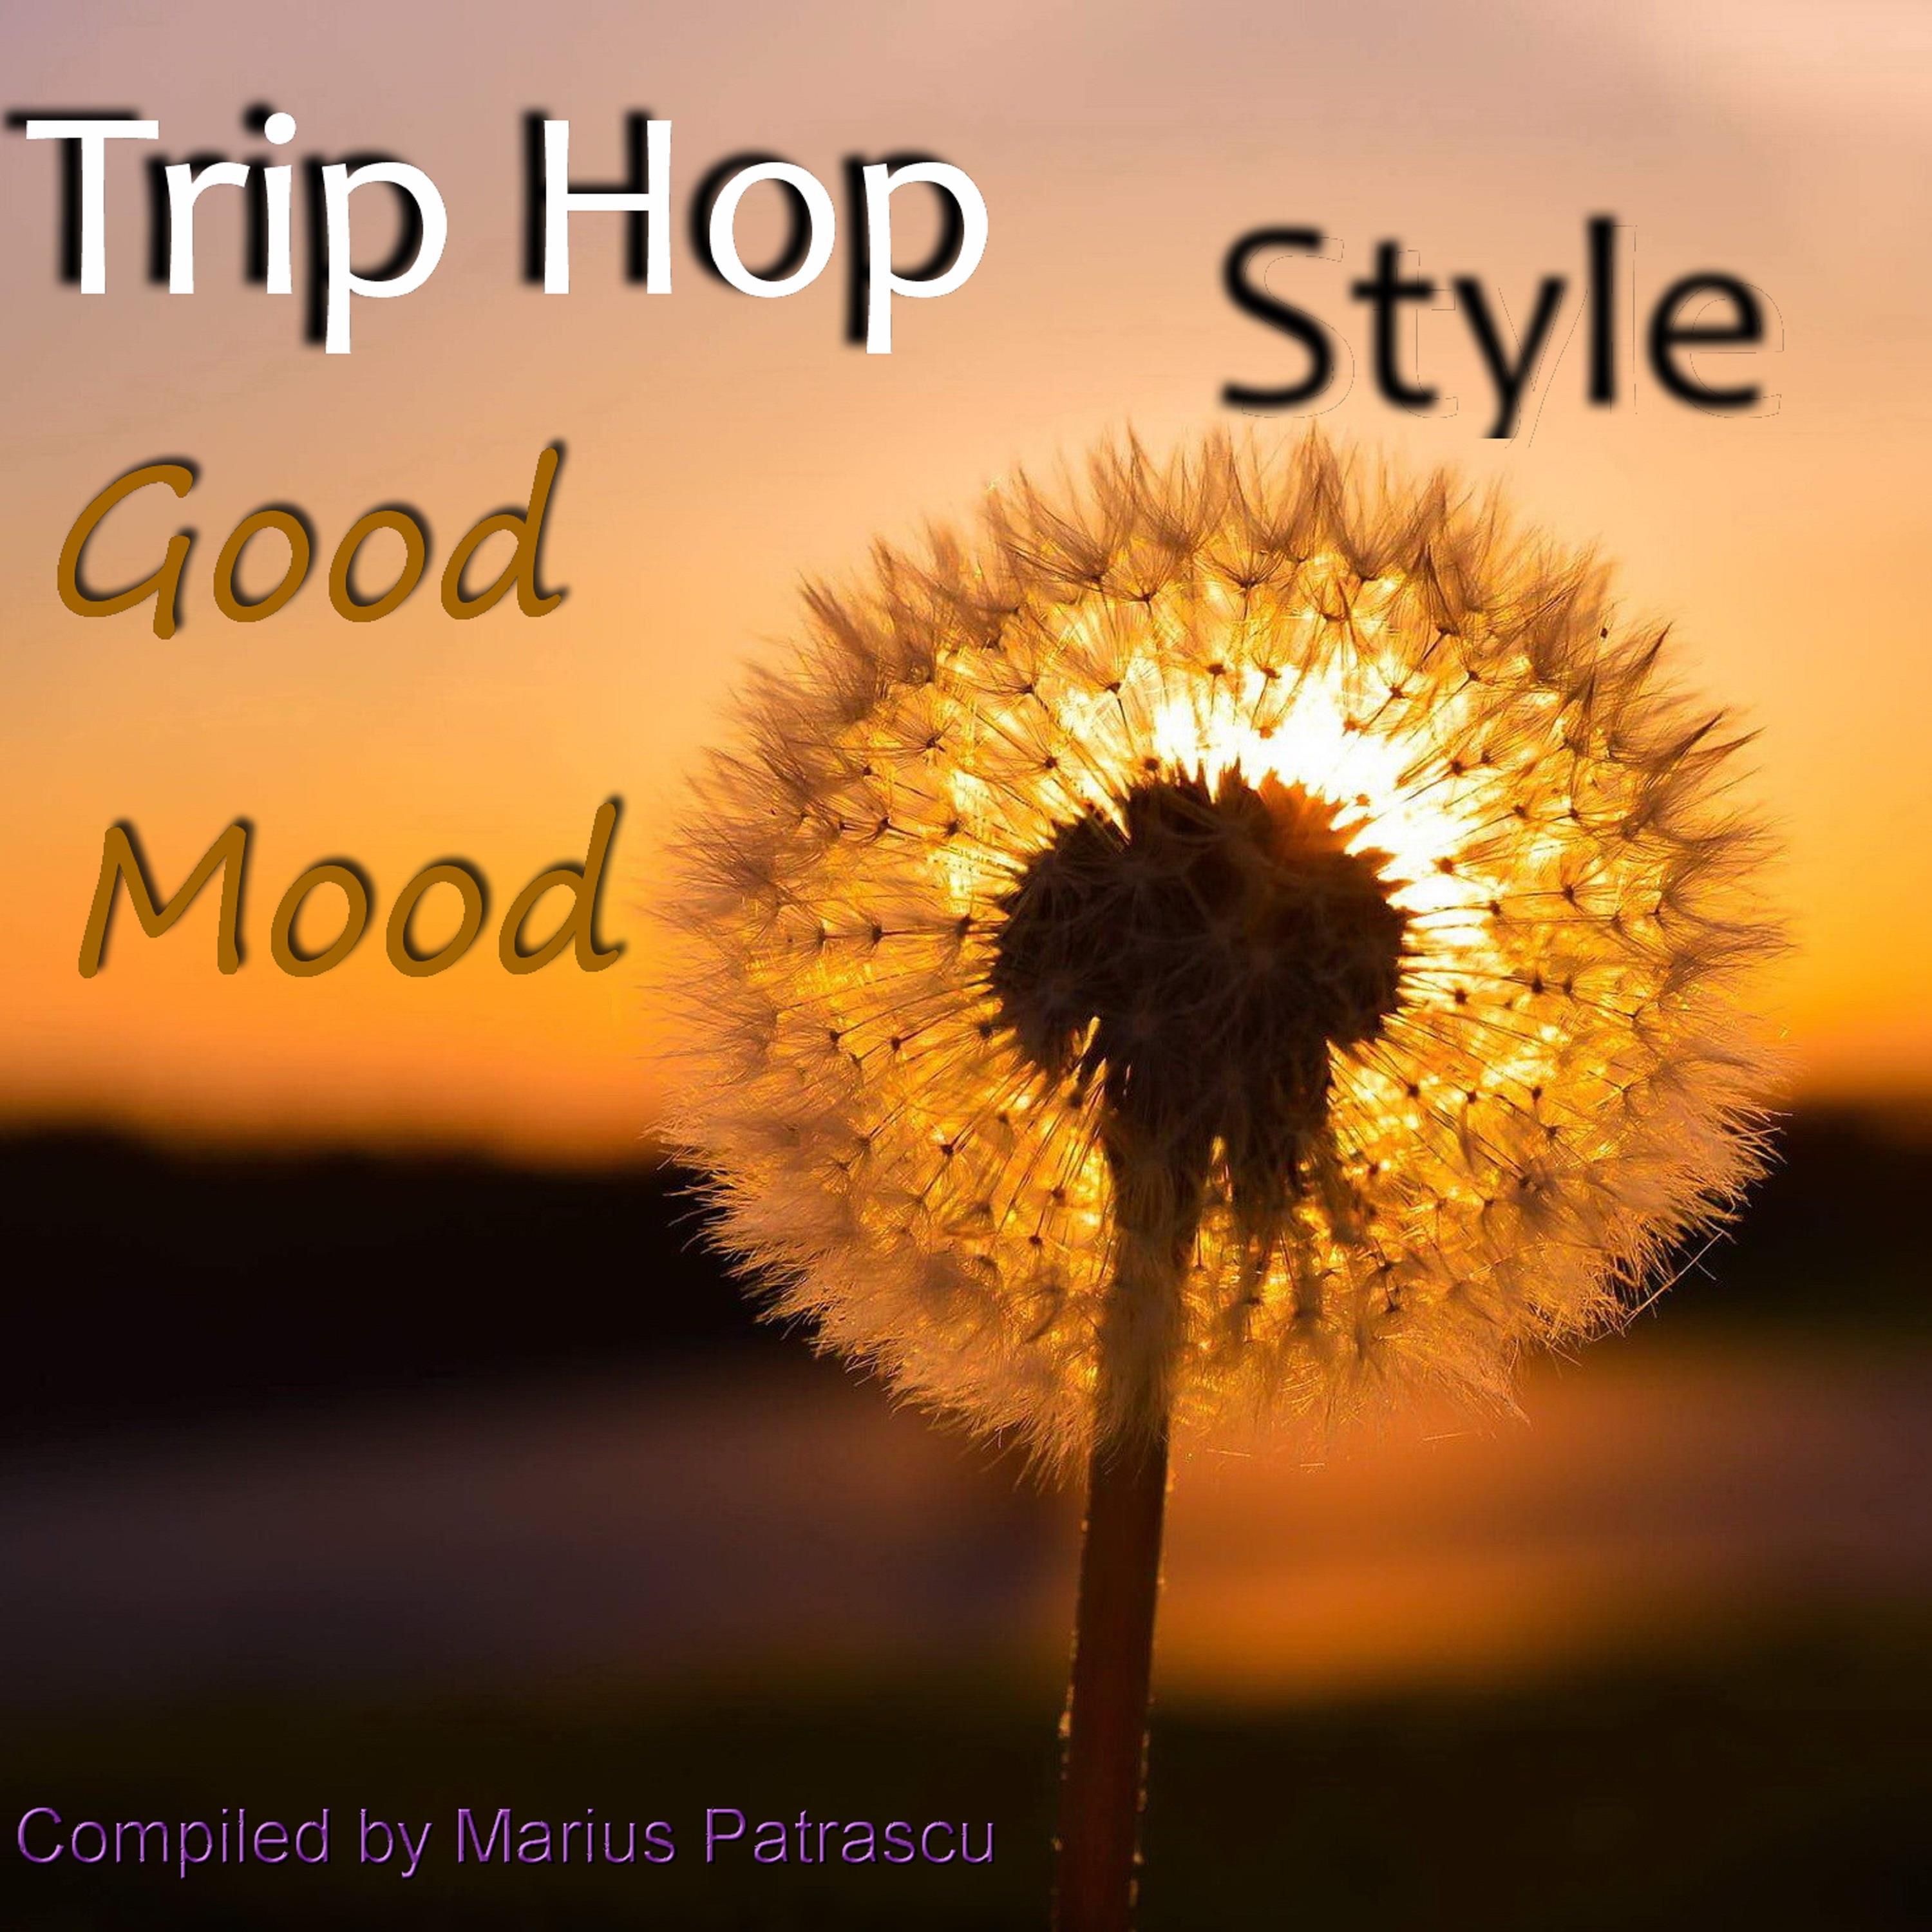 Trip Hop Good Mood Music Style (Compiled and Mixed by Marius Patrascu)